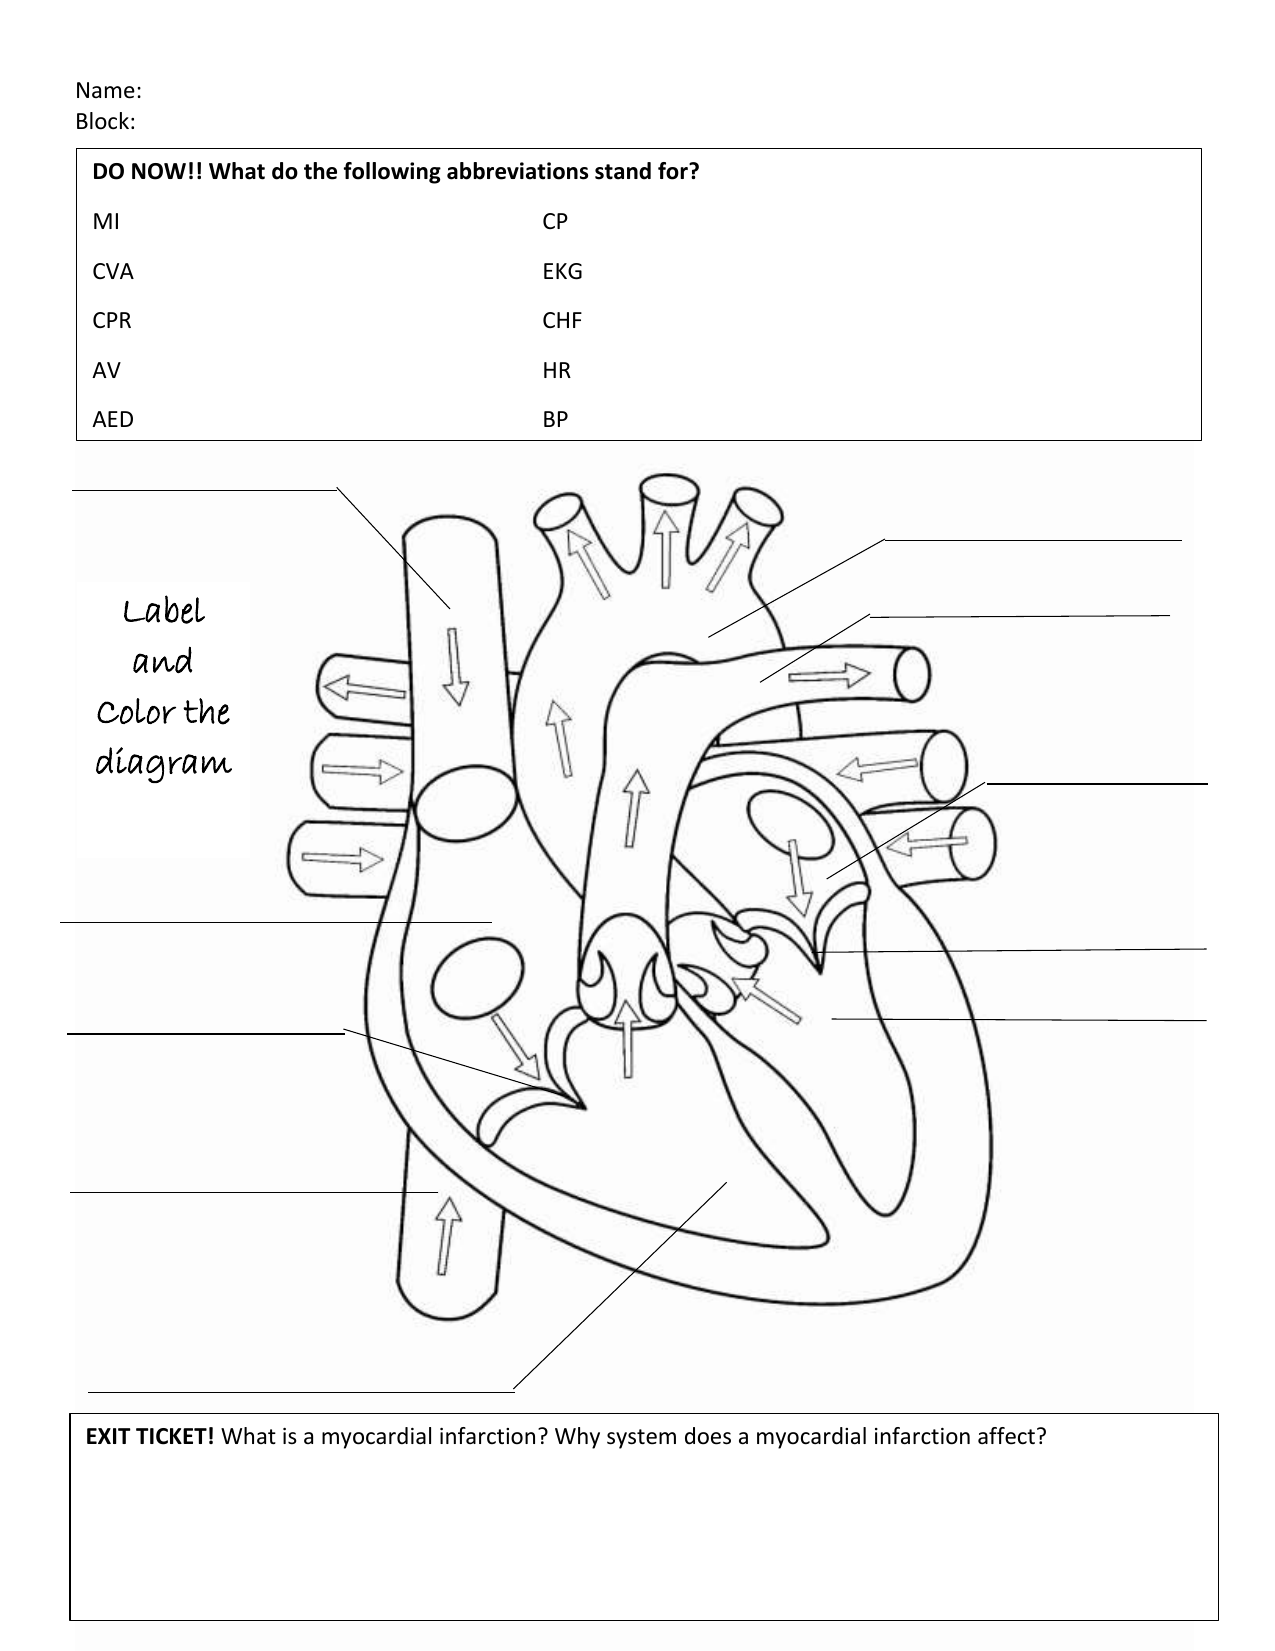 Cardiac anatomy worksheet to label and color